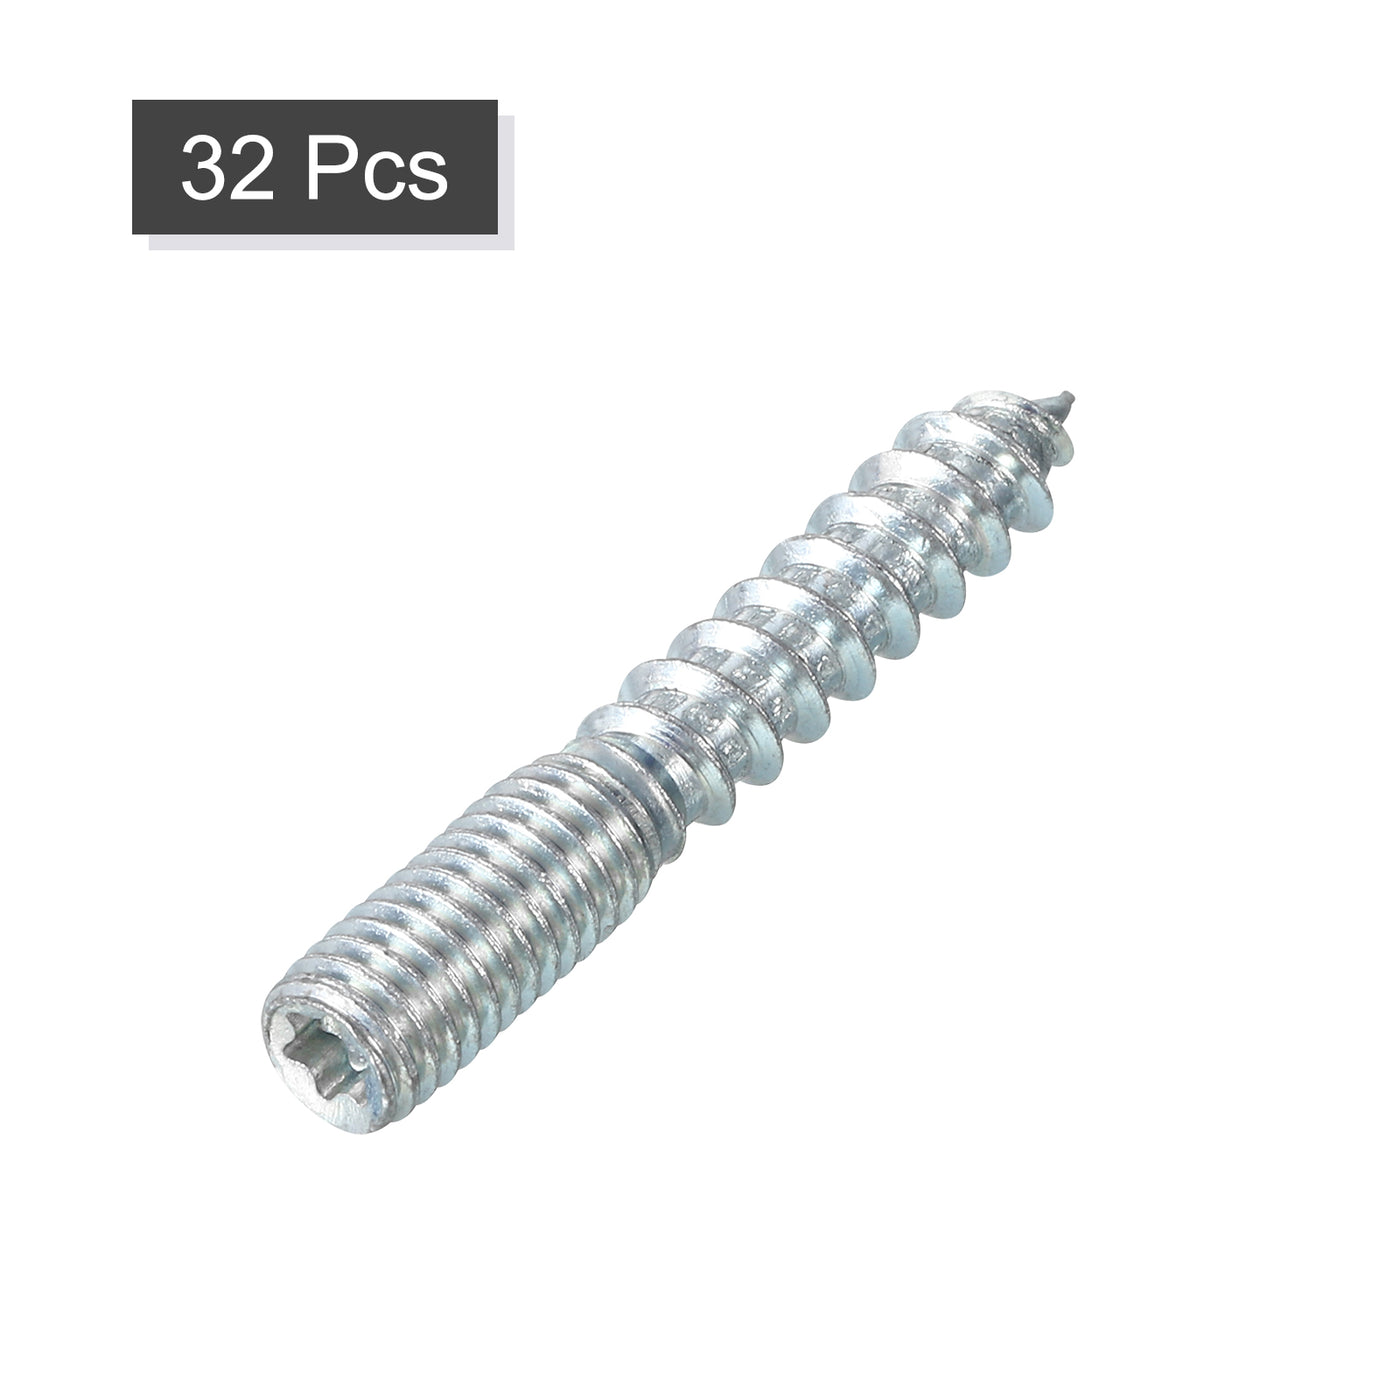 uxcell Uxcell 32Pcs M8x50mm Hanger Bolt Double Headed Bolt Self-Tapping Screw for Furniture